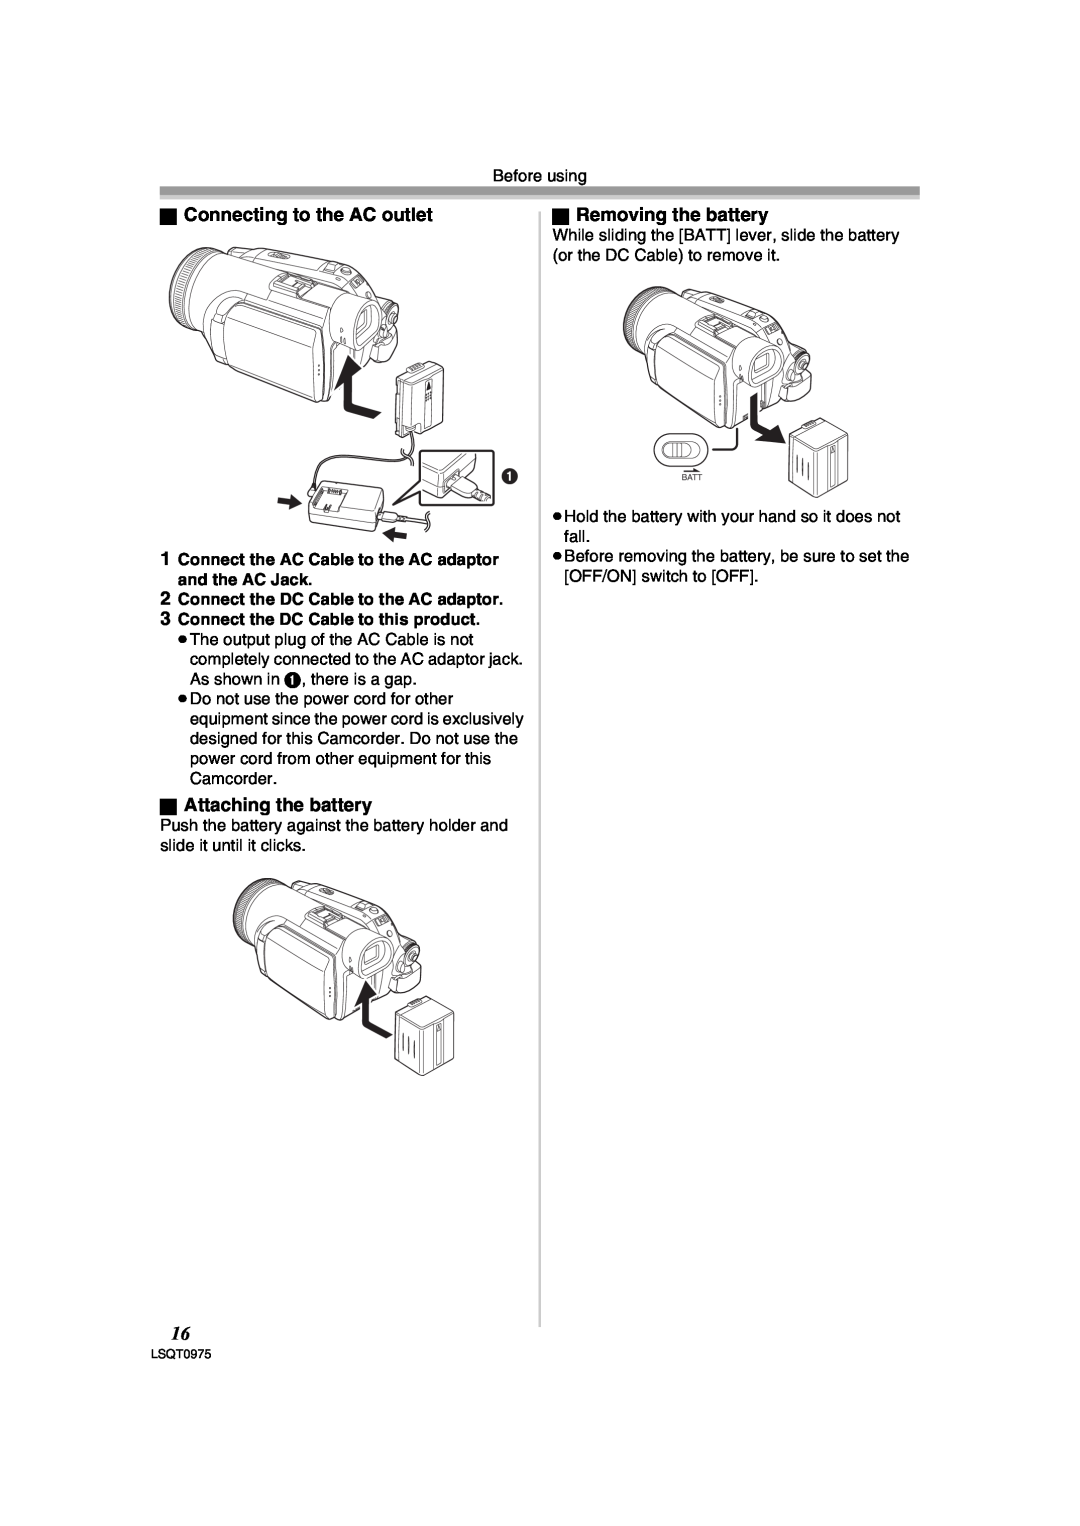 Panasonic PV-GS500 operating instructions ª Connecting to the AC outlet, ª Attaching the battery, ª Removing the battery 